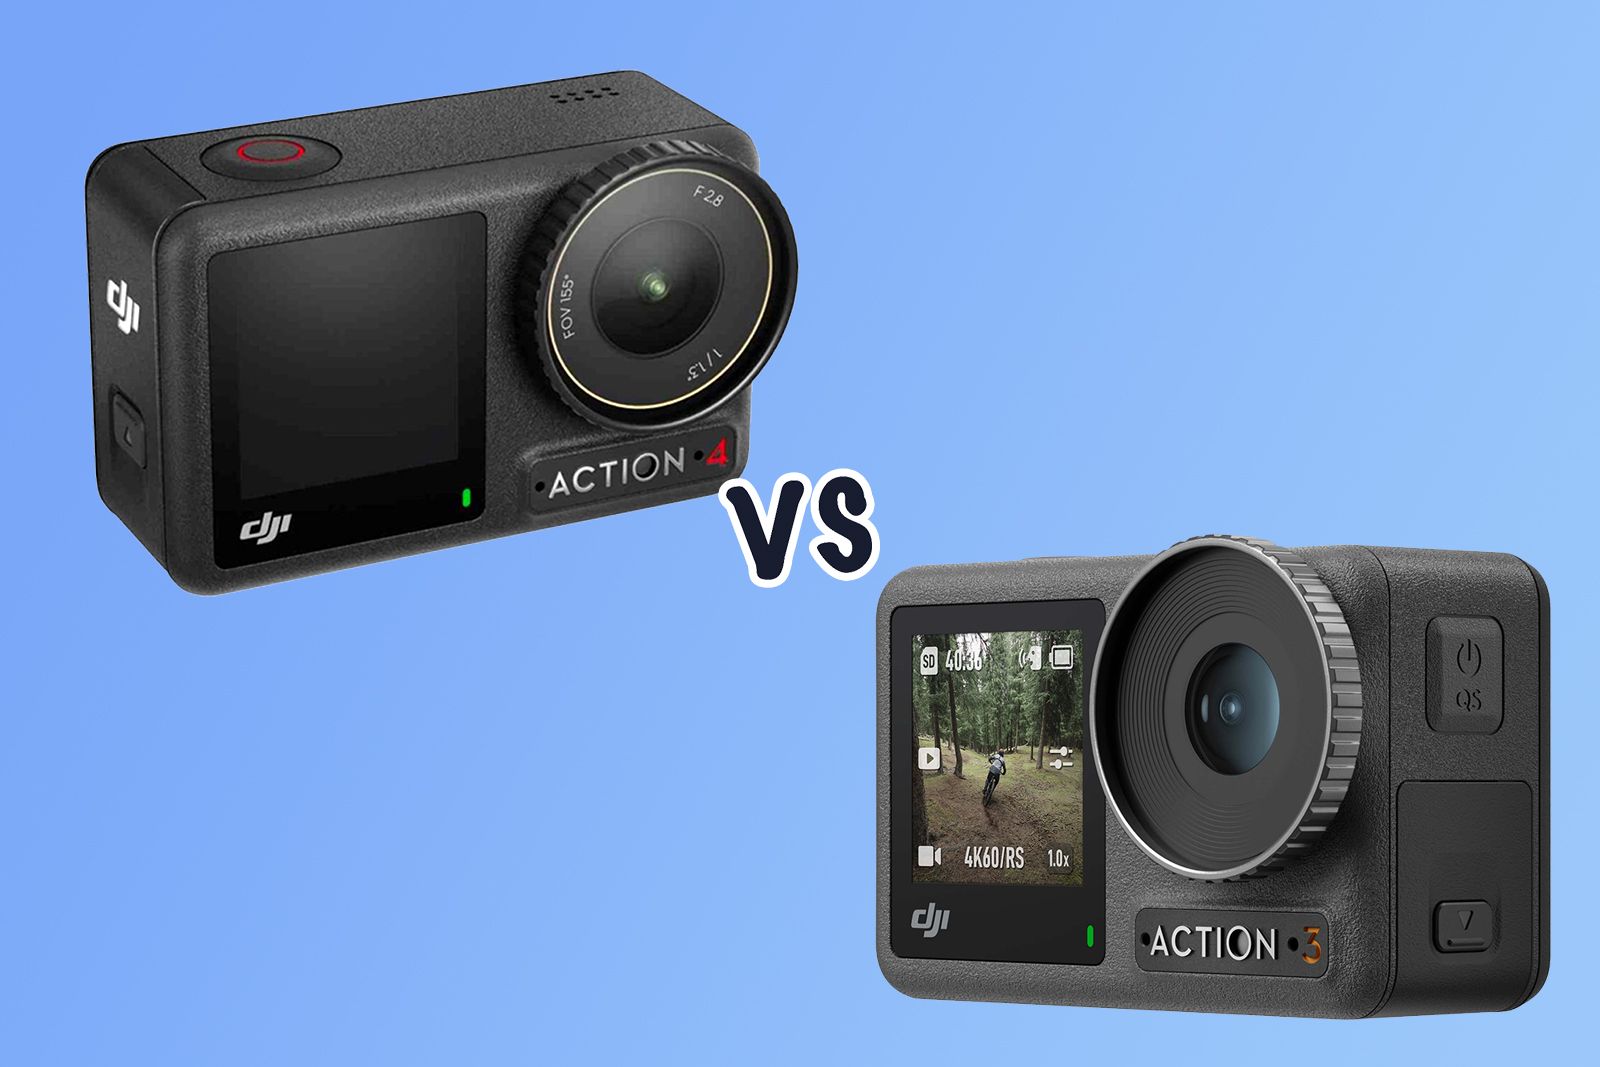 DJI Osmo Action 4 vs DJI Osmo Action 3: What's the difference?